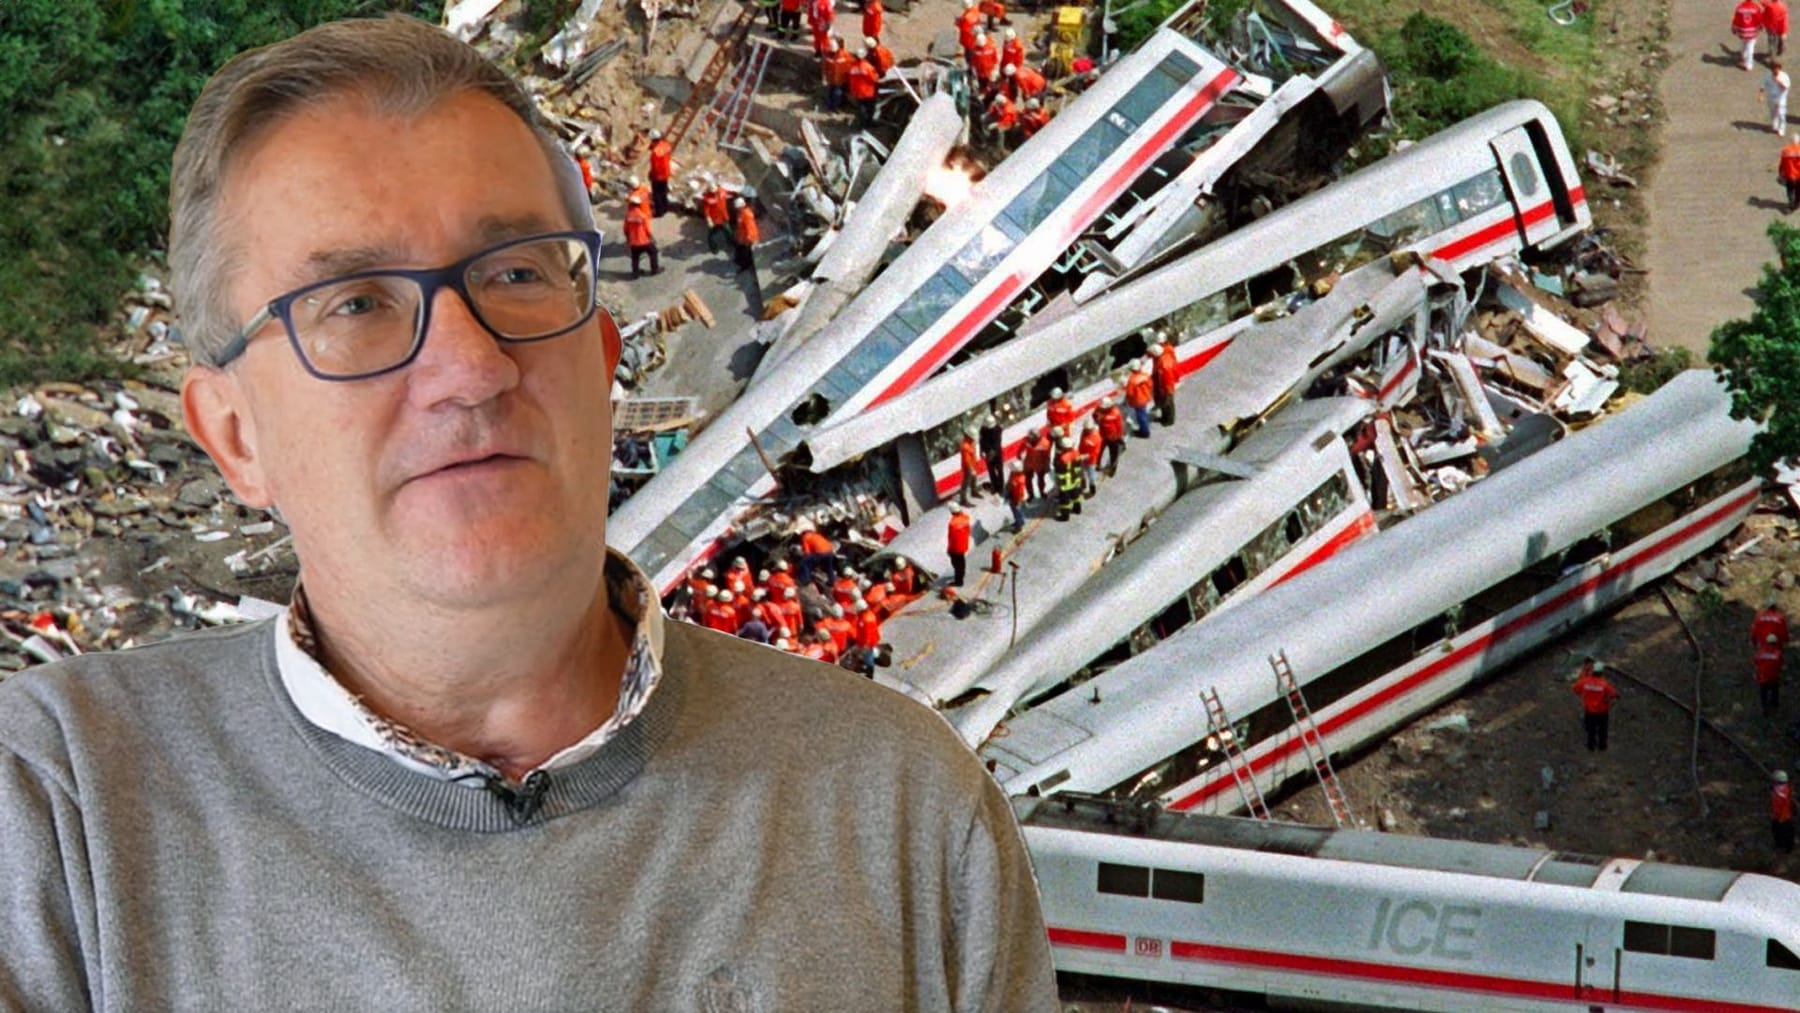 'People can still live!': 25 years after the Eschede train accident ...